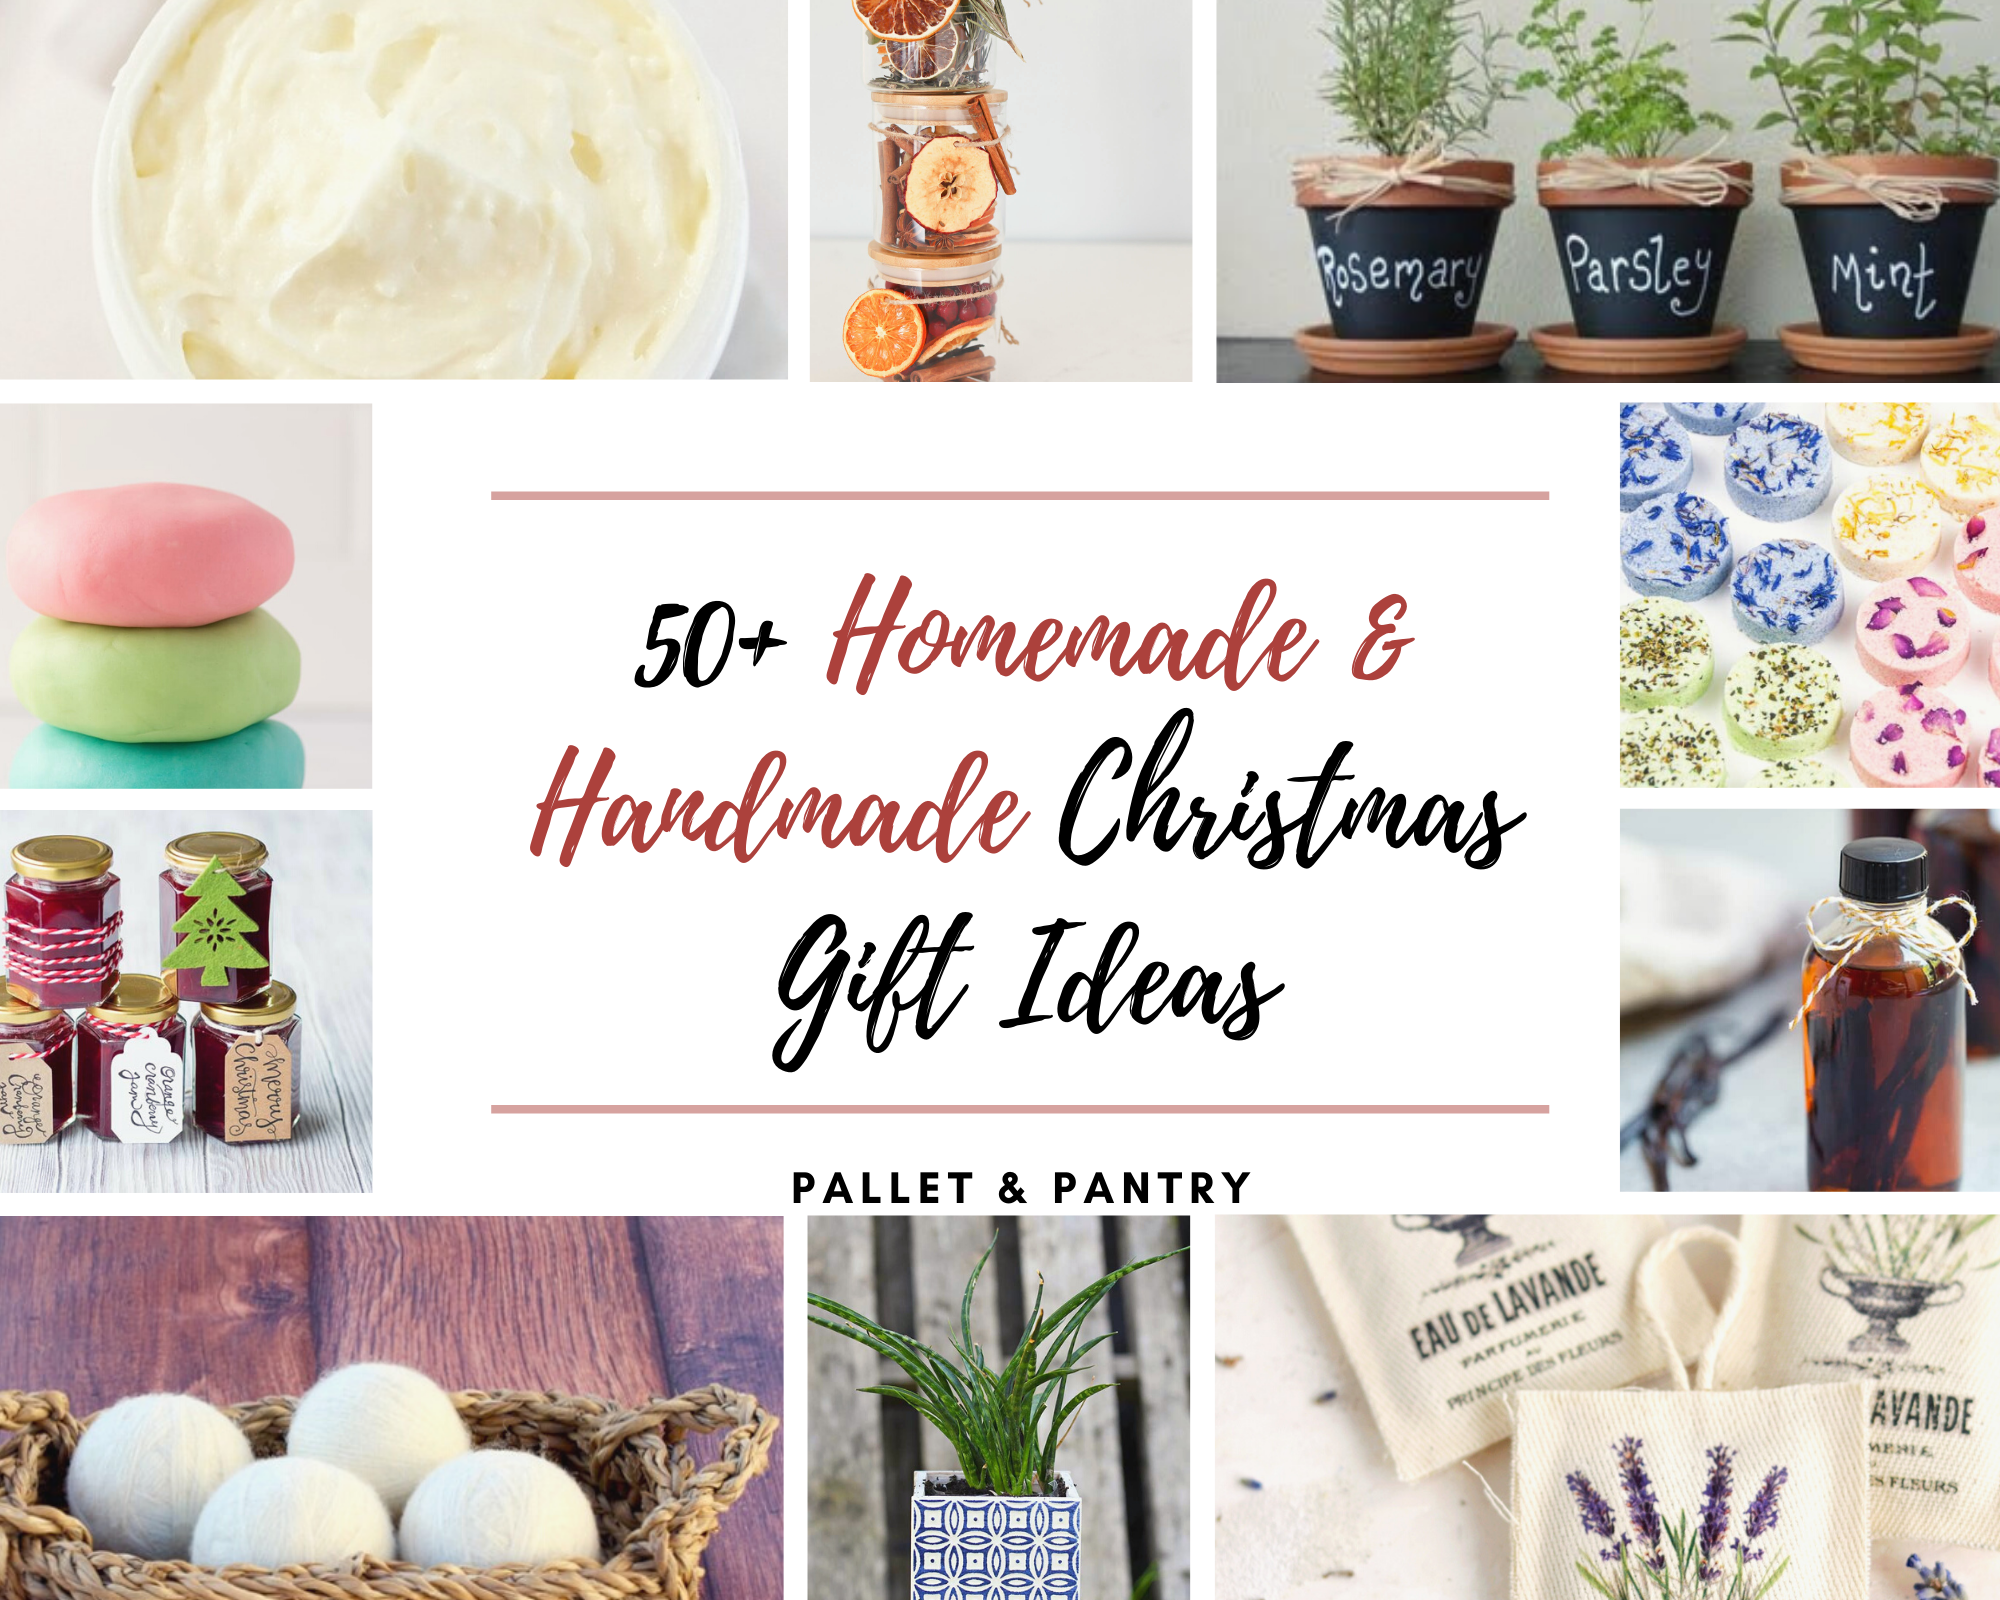 Personalized Gift Ideas For Her - Clean and Scentsible